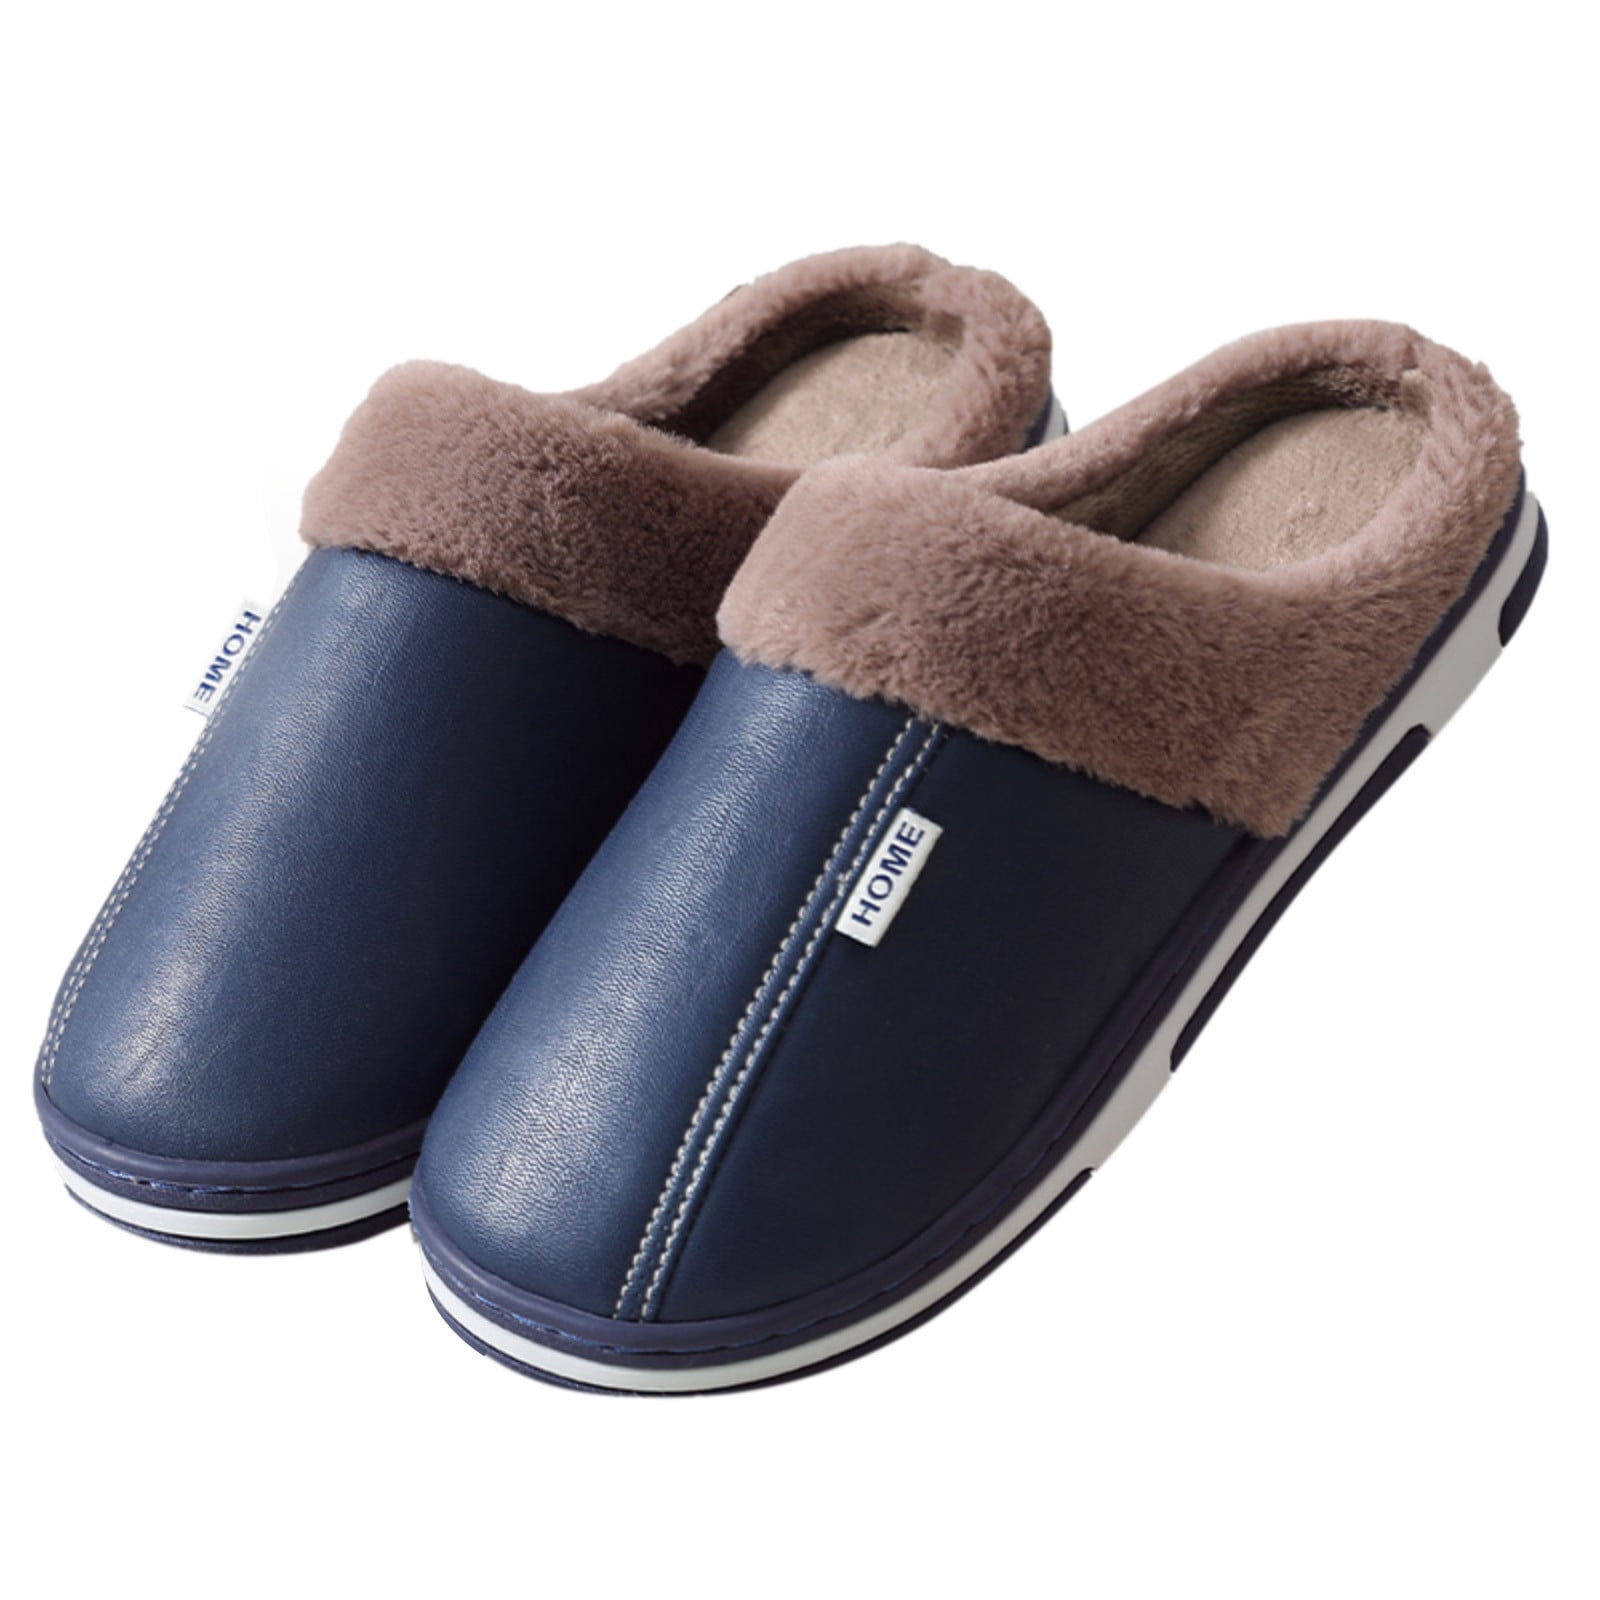 Brown Flossy Style Memory Foam Slippers UK8 Soft & Comfortable With Rubber Sole 